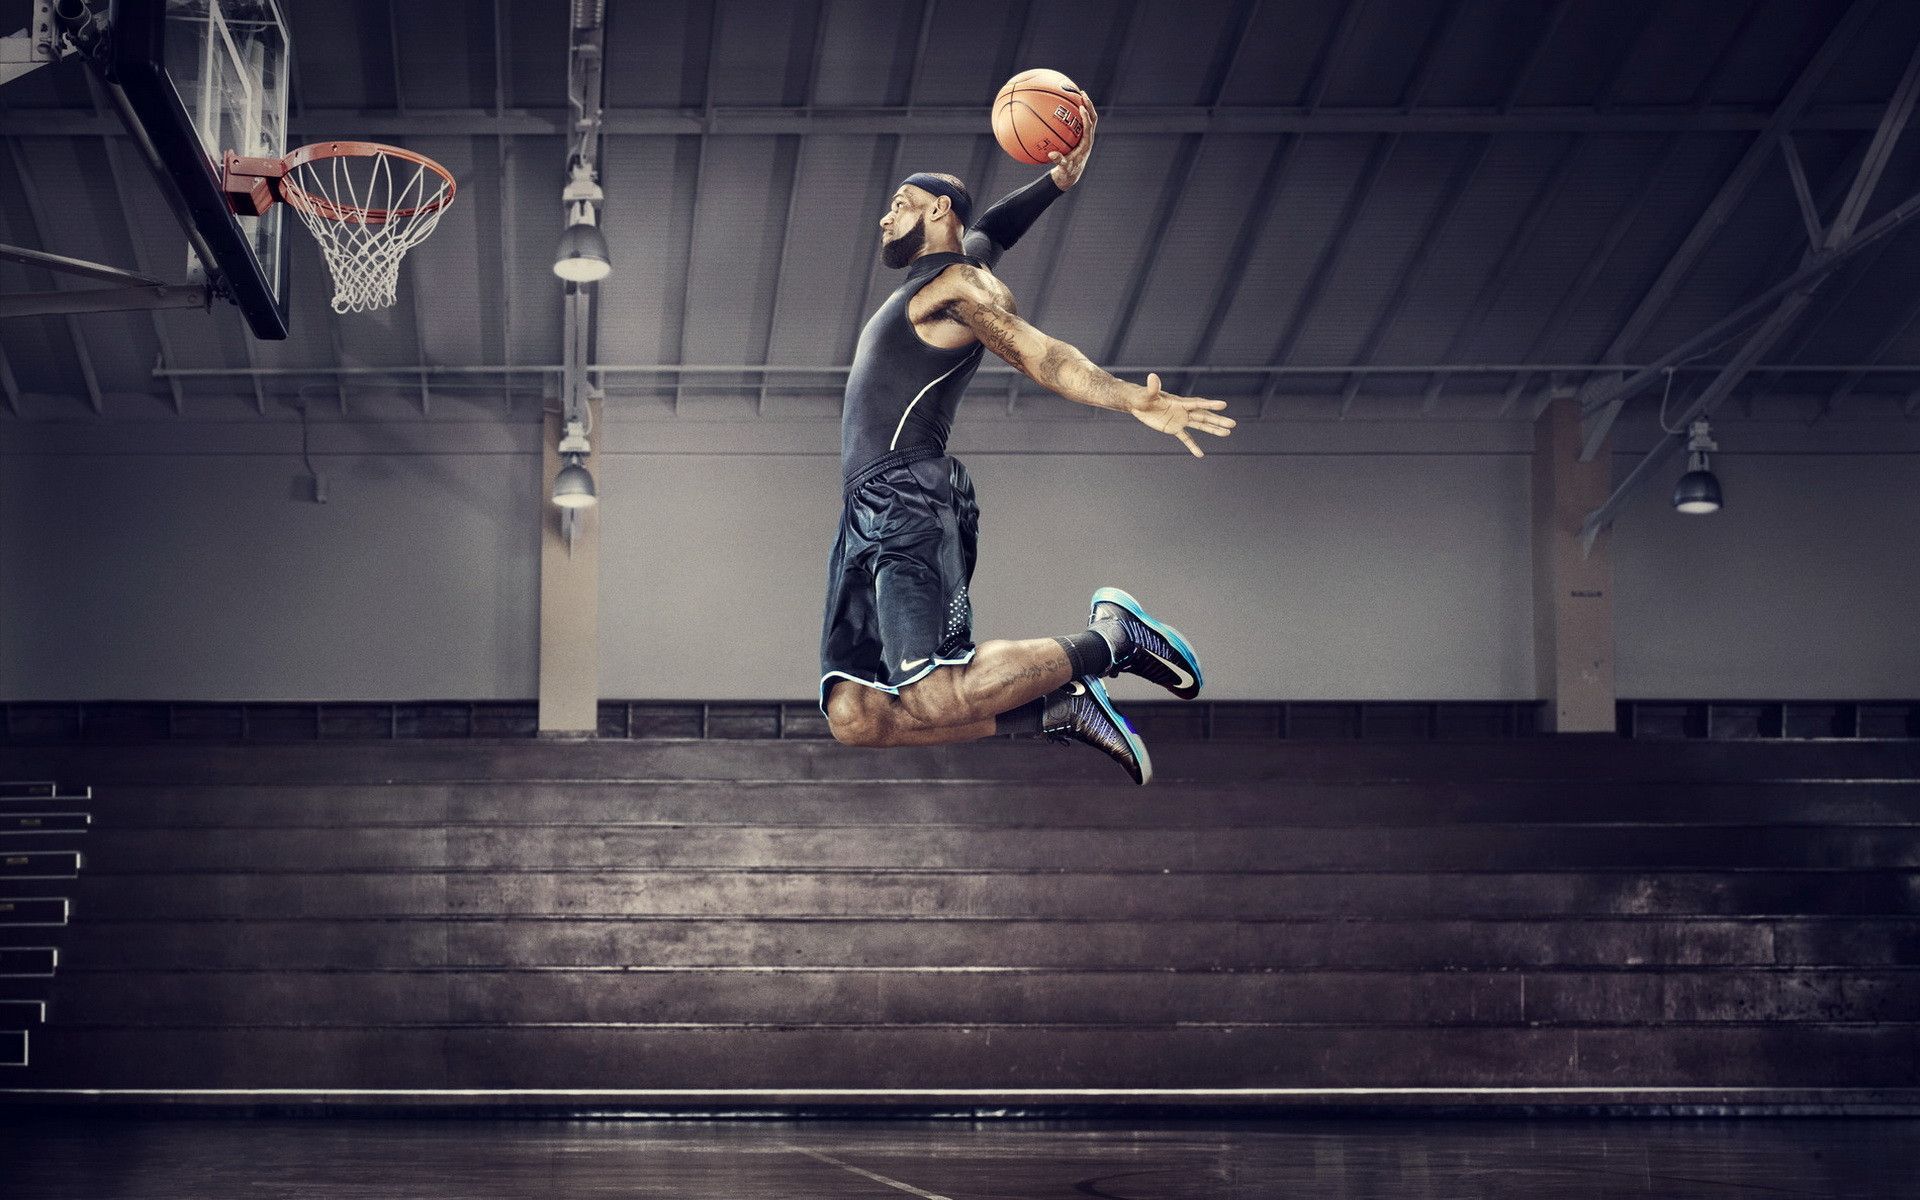 Best 7 benefits of playing basketball you have not think about